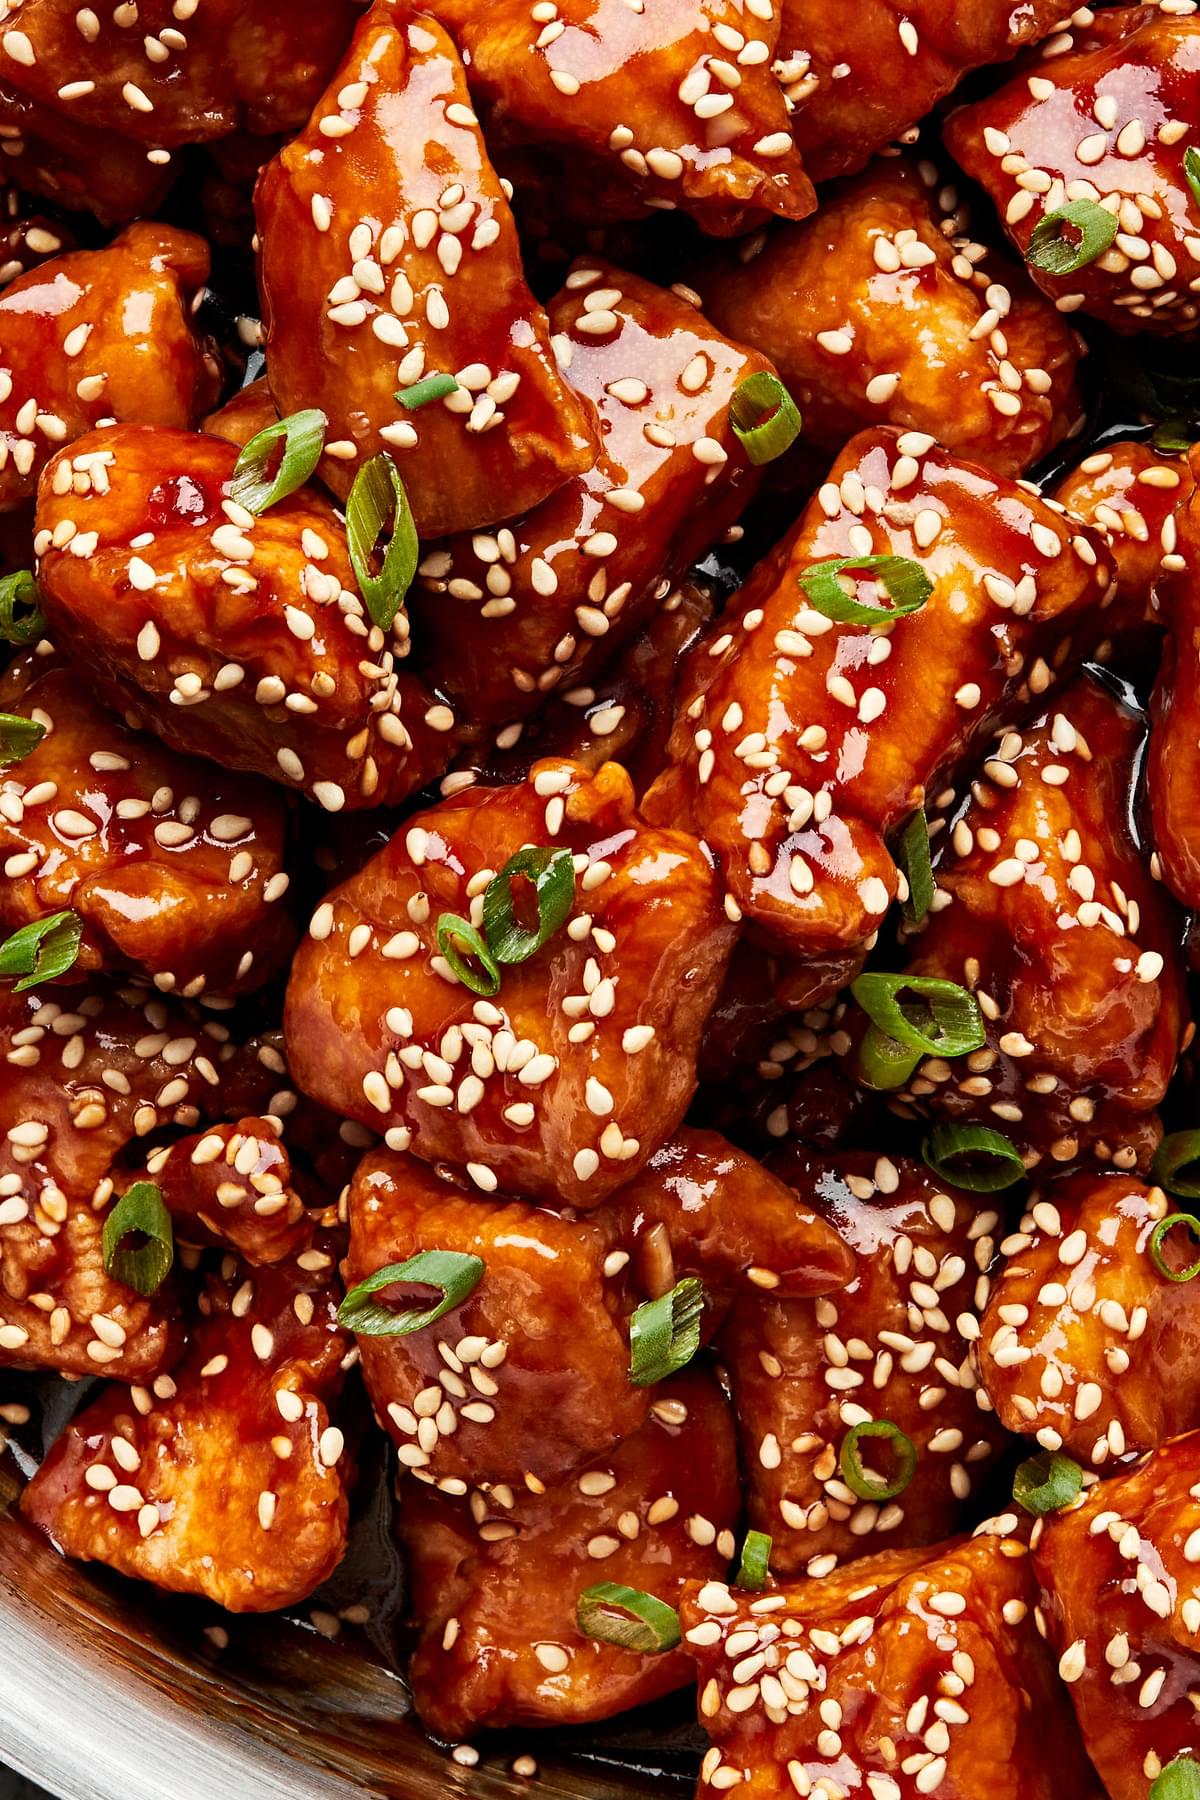 homemade sesame chicken sprinkled with sesame seeds and green onions